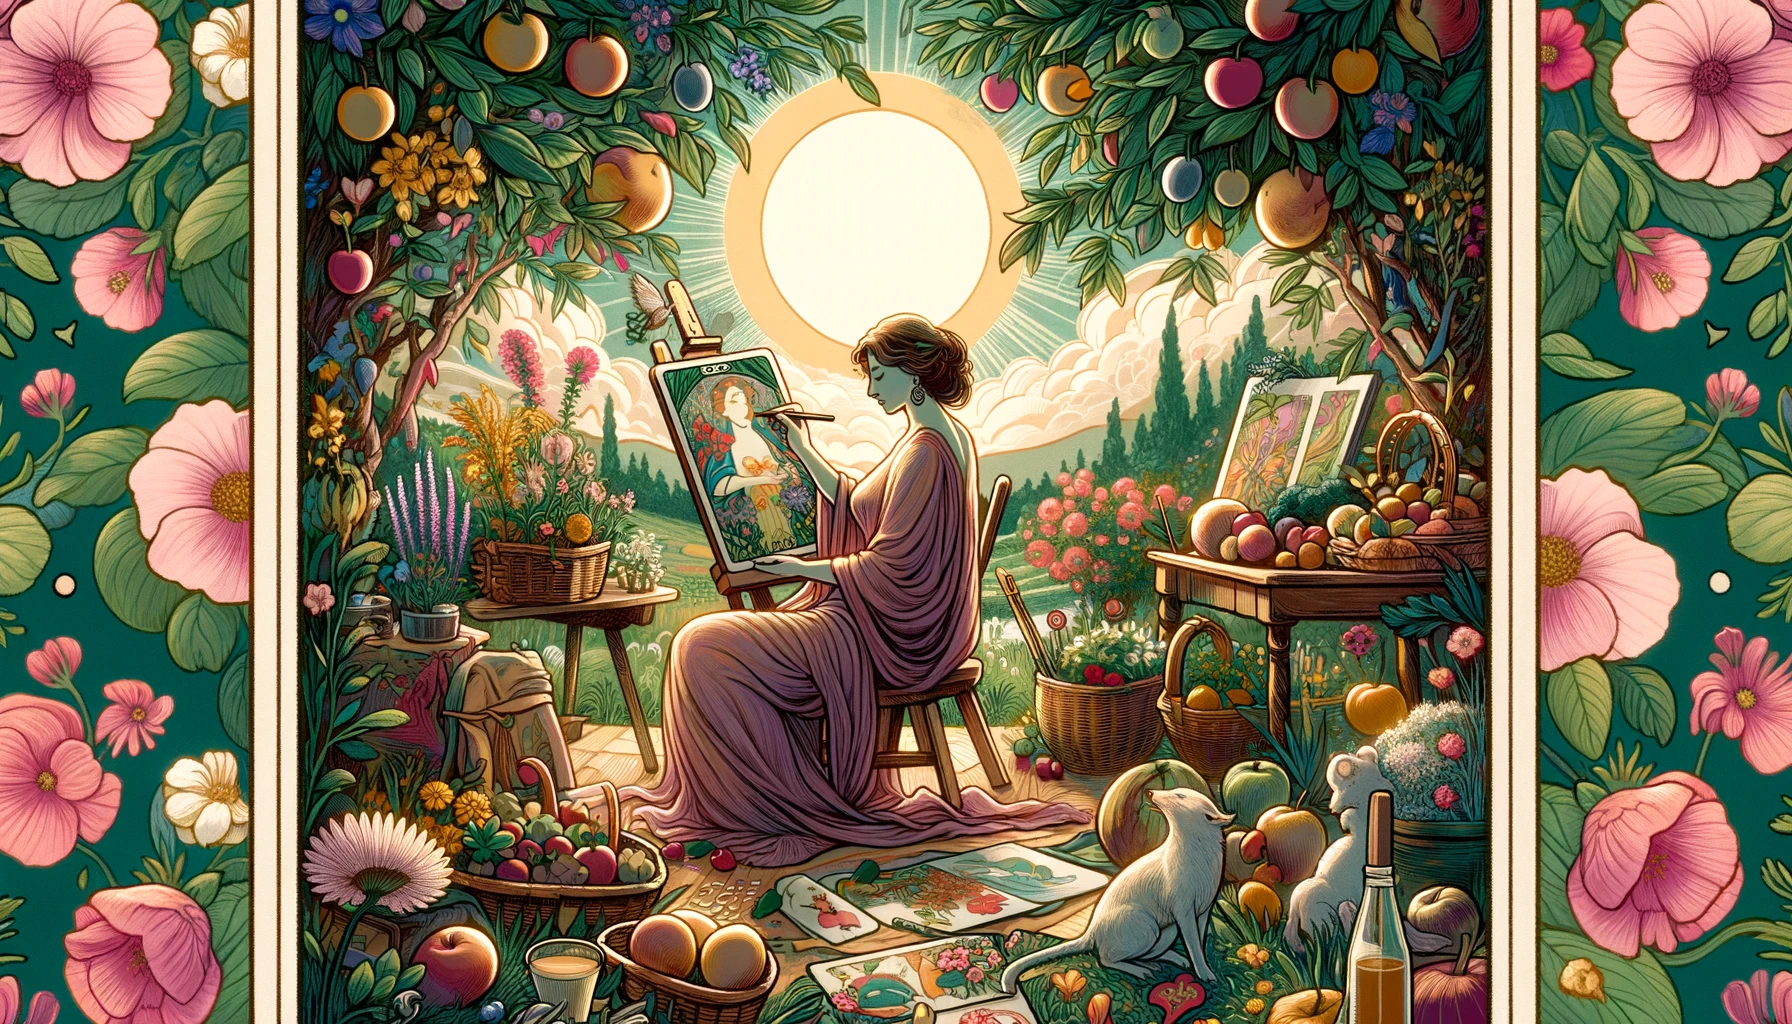 "A serene scene featuring blooming flowers, ripe fruits, and lush greenery, highlighting the connection to nature and nurturing aspects. The central figure radiates calm, strength, and maternal energy. The rich and warm color palette enhances the life-giving and creative essence of The Empress."